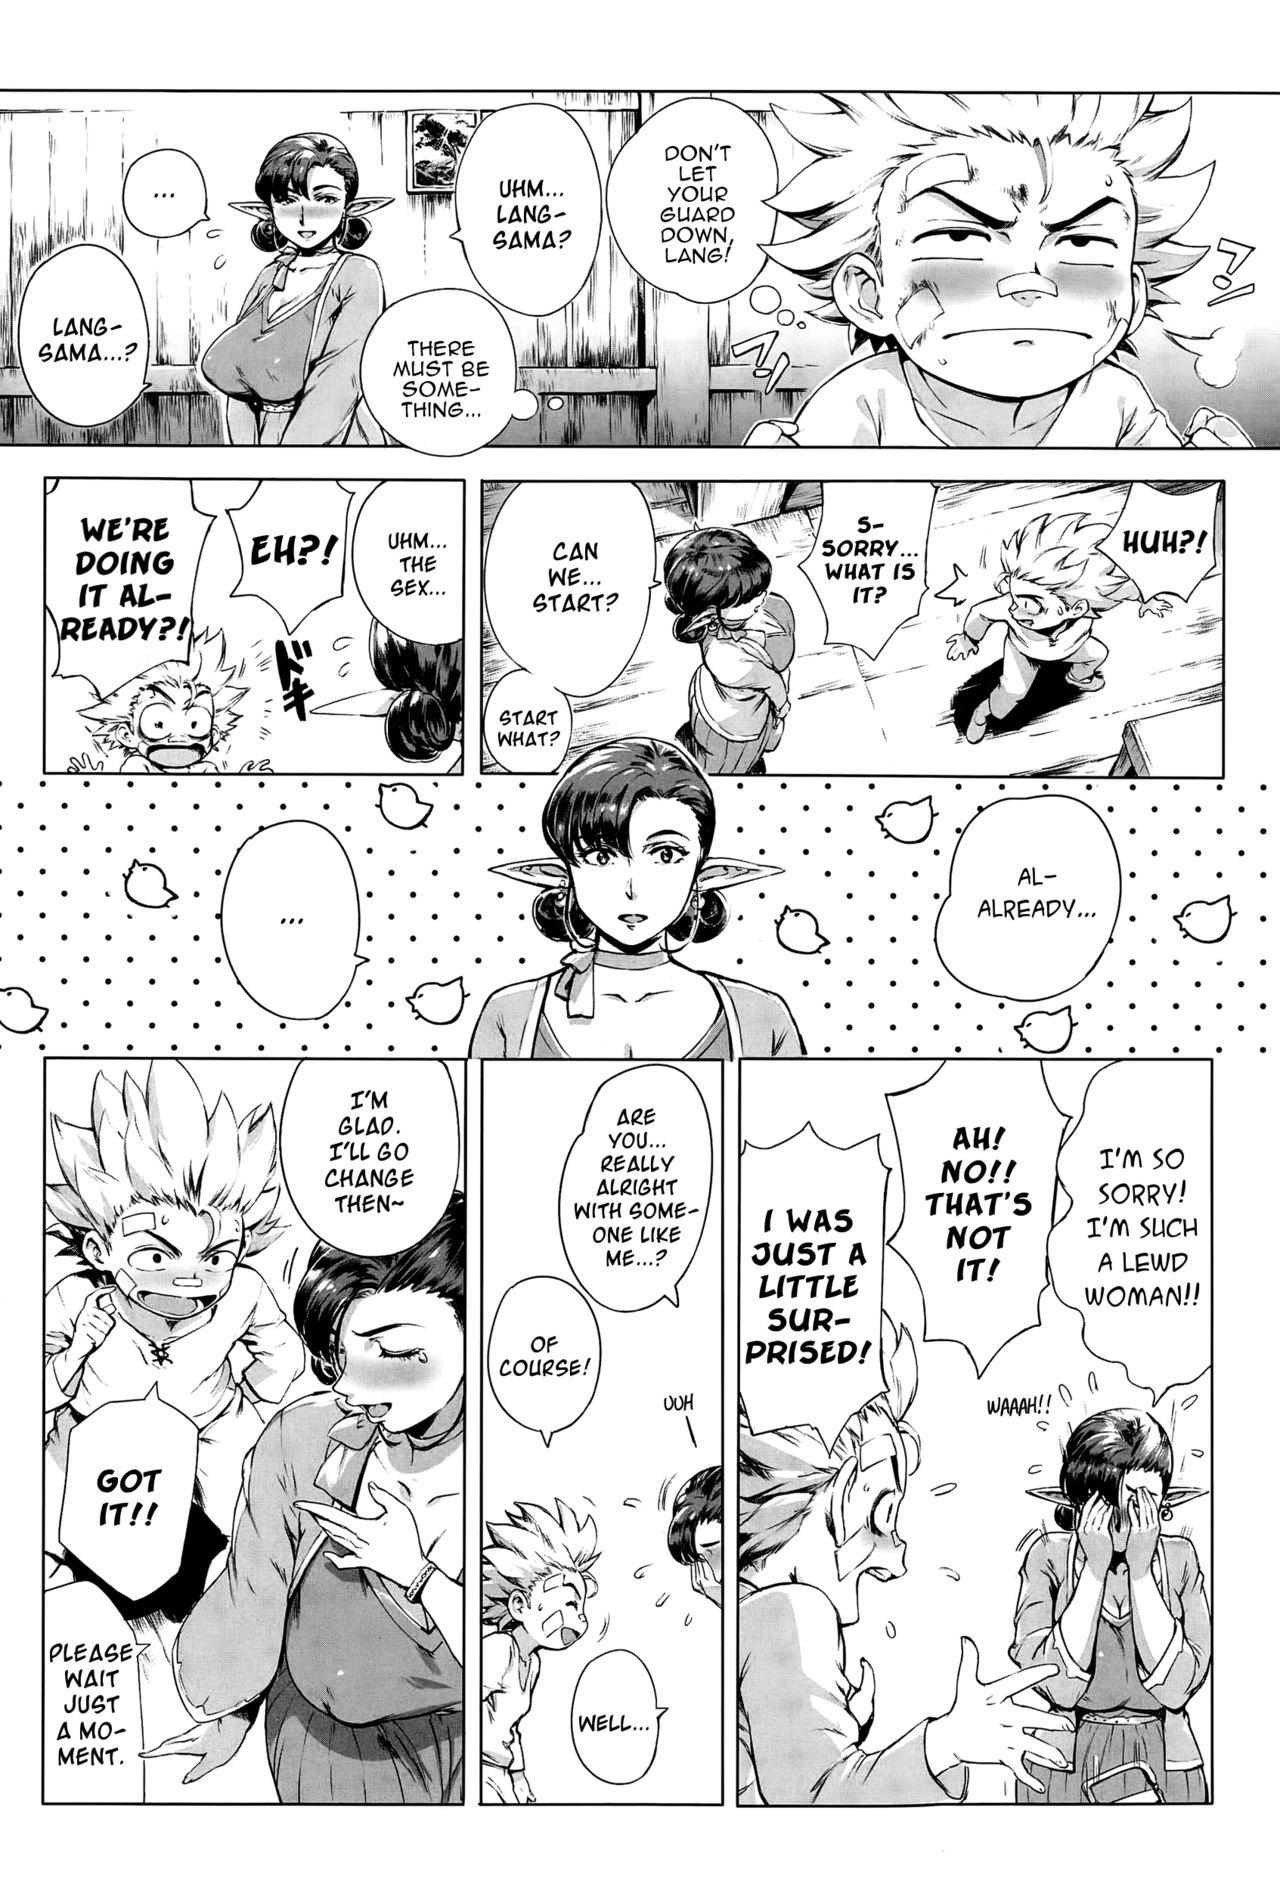 Puta Koko ga Tanetsuke Frontier | This Is The Mating Frontier! Ch. 1-2 Heels - Page 10